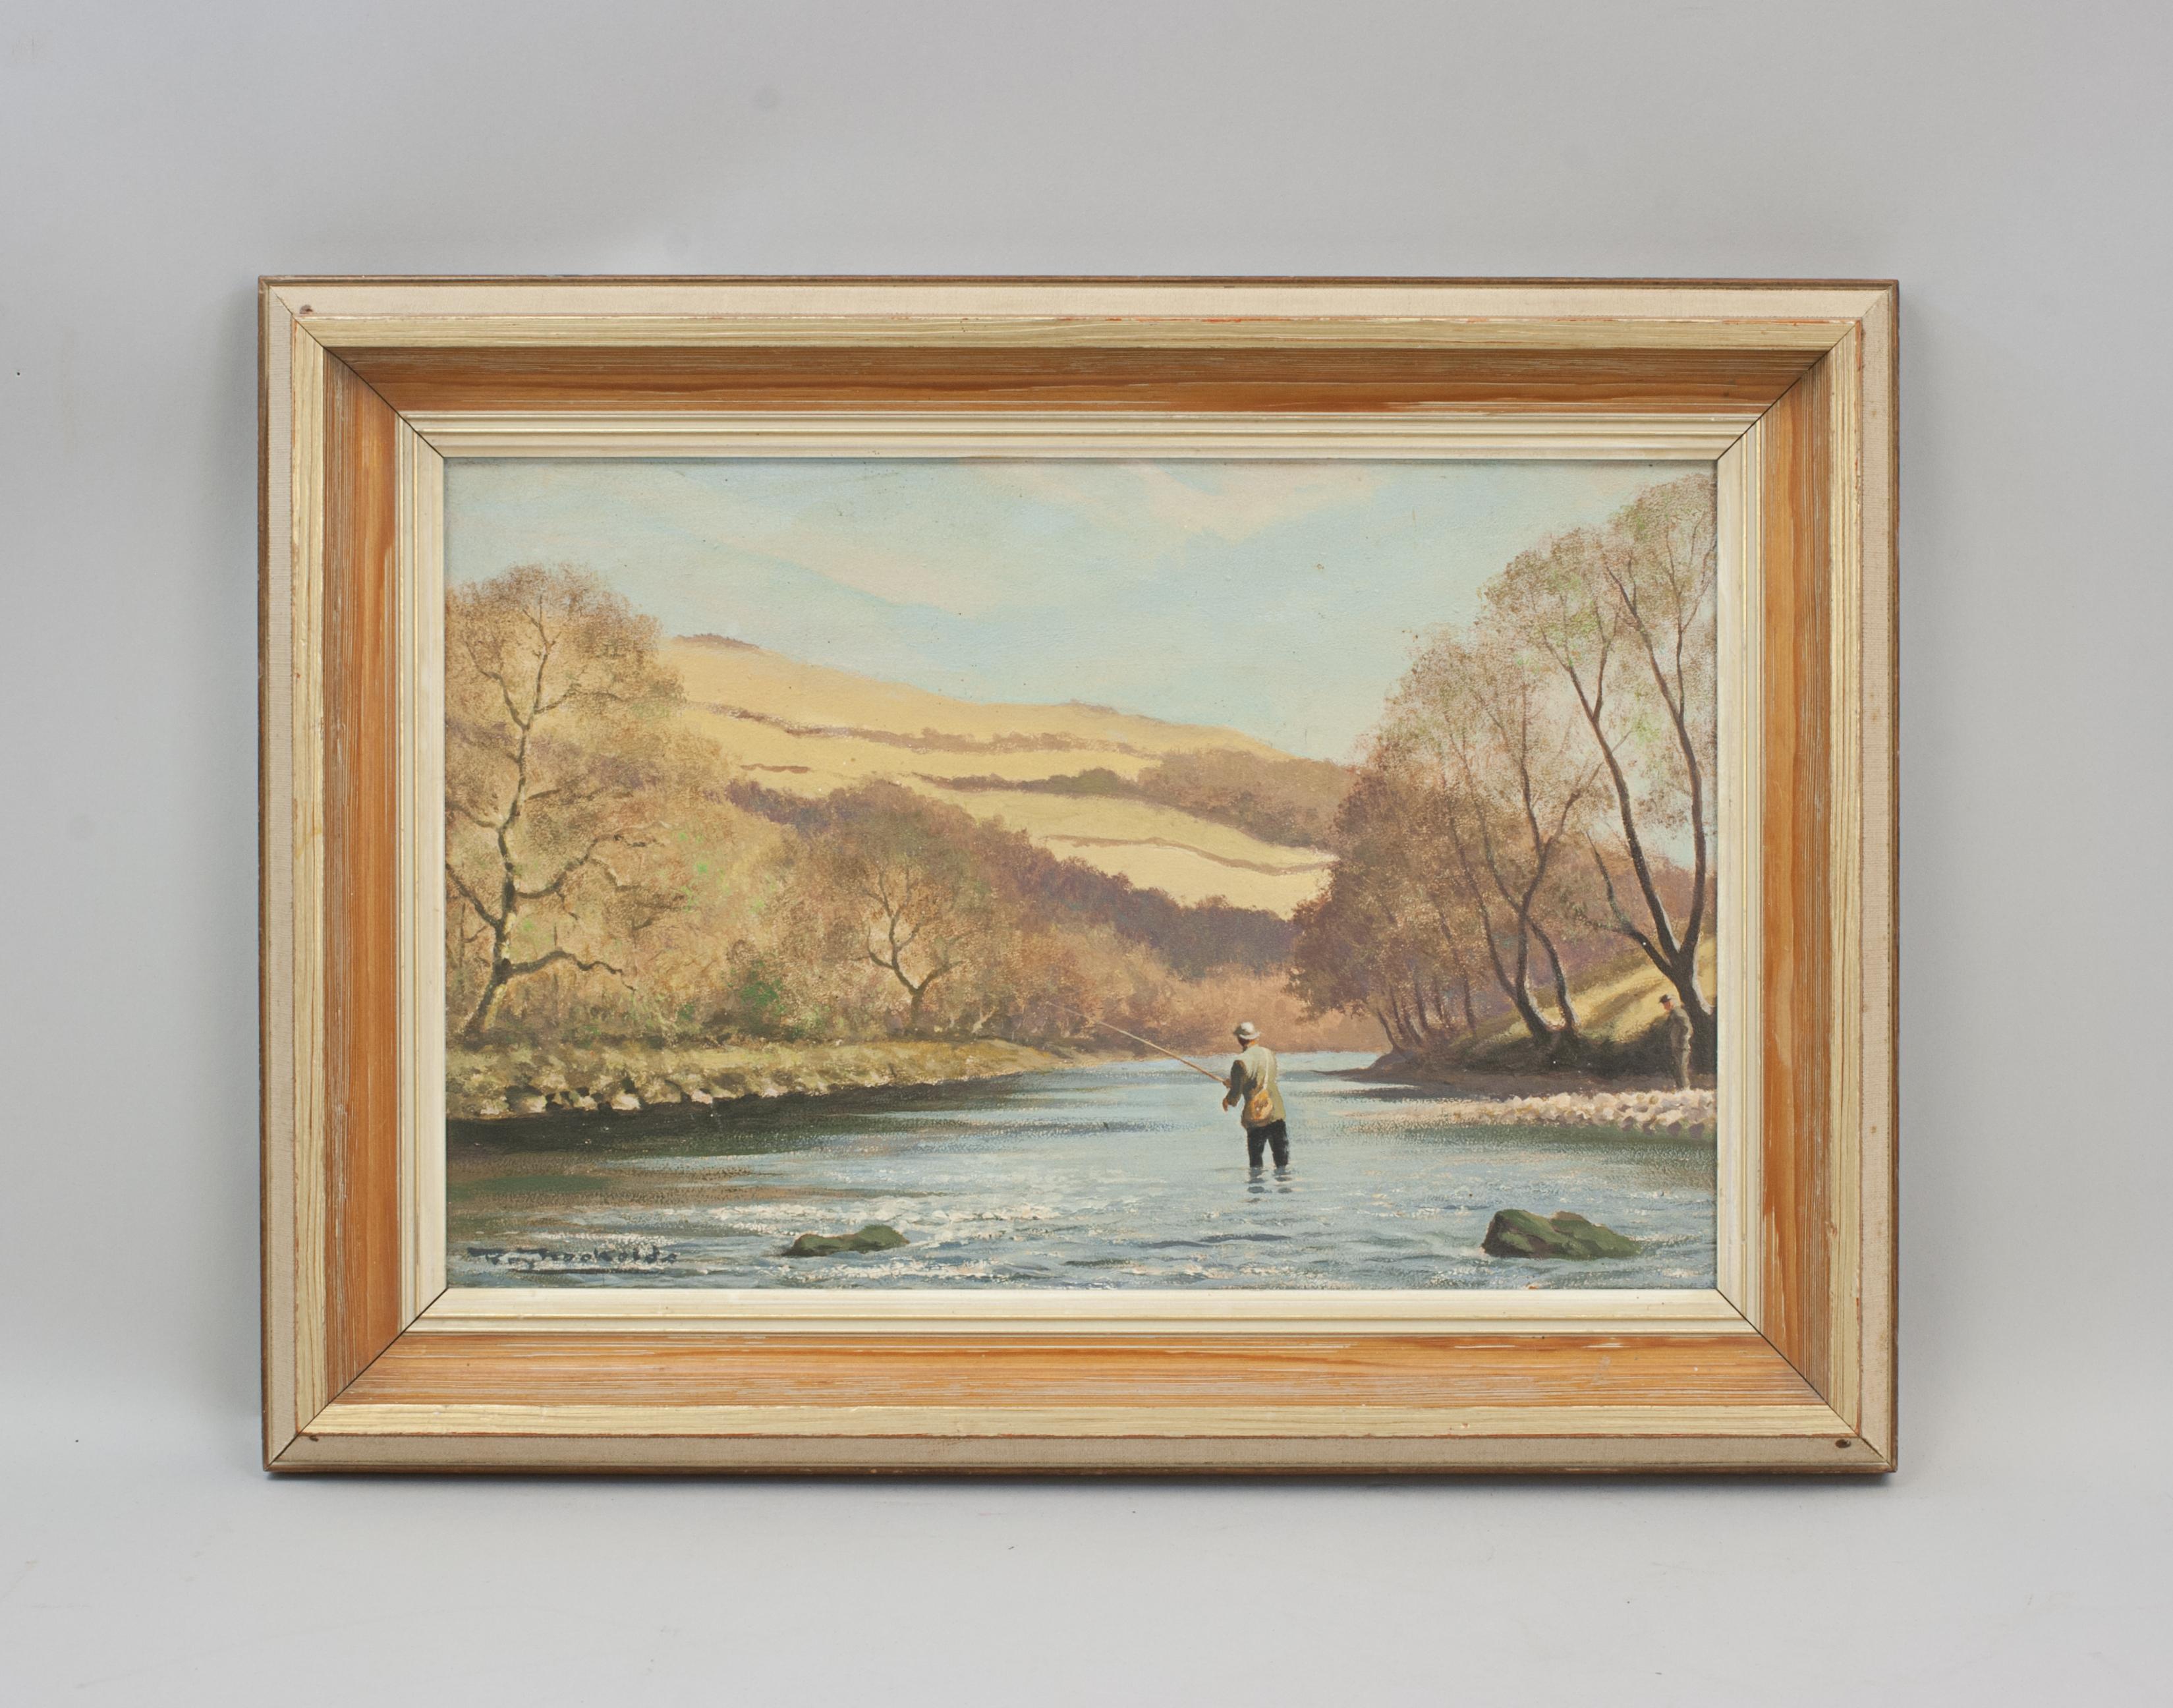 Roy Nockolds Fly Fishing Oil painting.
A charming, atmospheric, colourful original oil on board of a gentleman fly fishing in the river, an onlooker can be seen standing on the river bank. Signed by the artist, Roy Nockolds, bottom left-hand corner.